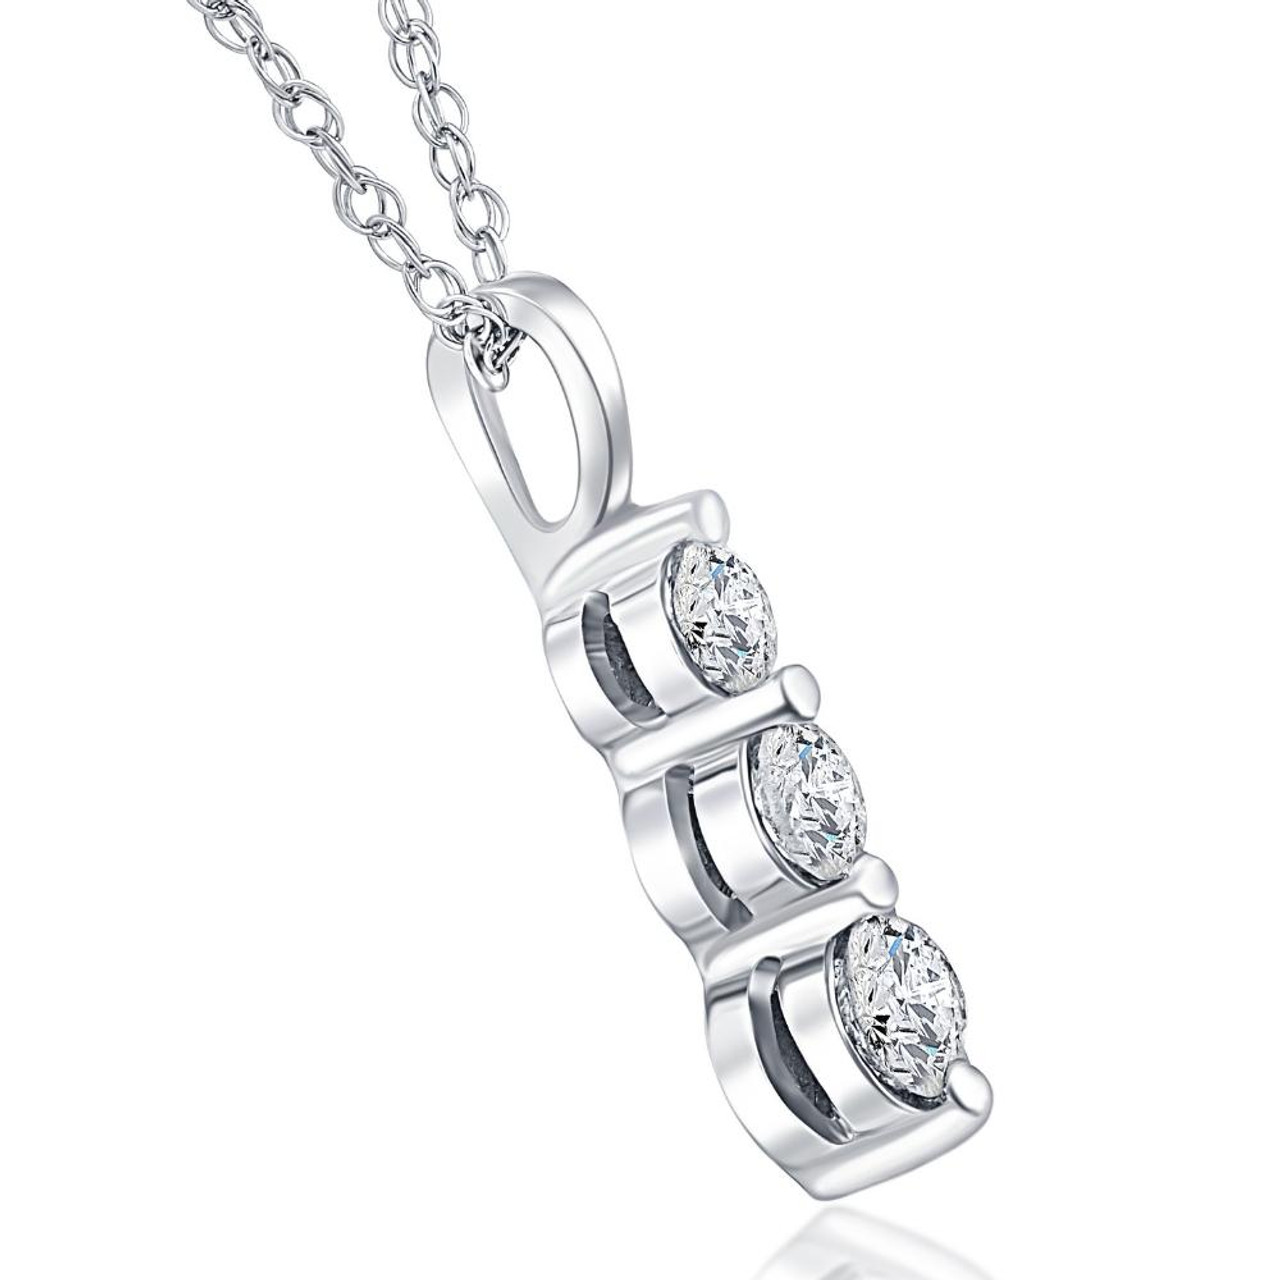 Necklace in 18k white gold with fancy diamond trilogy pendant